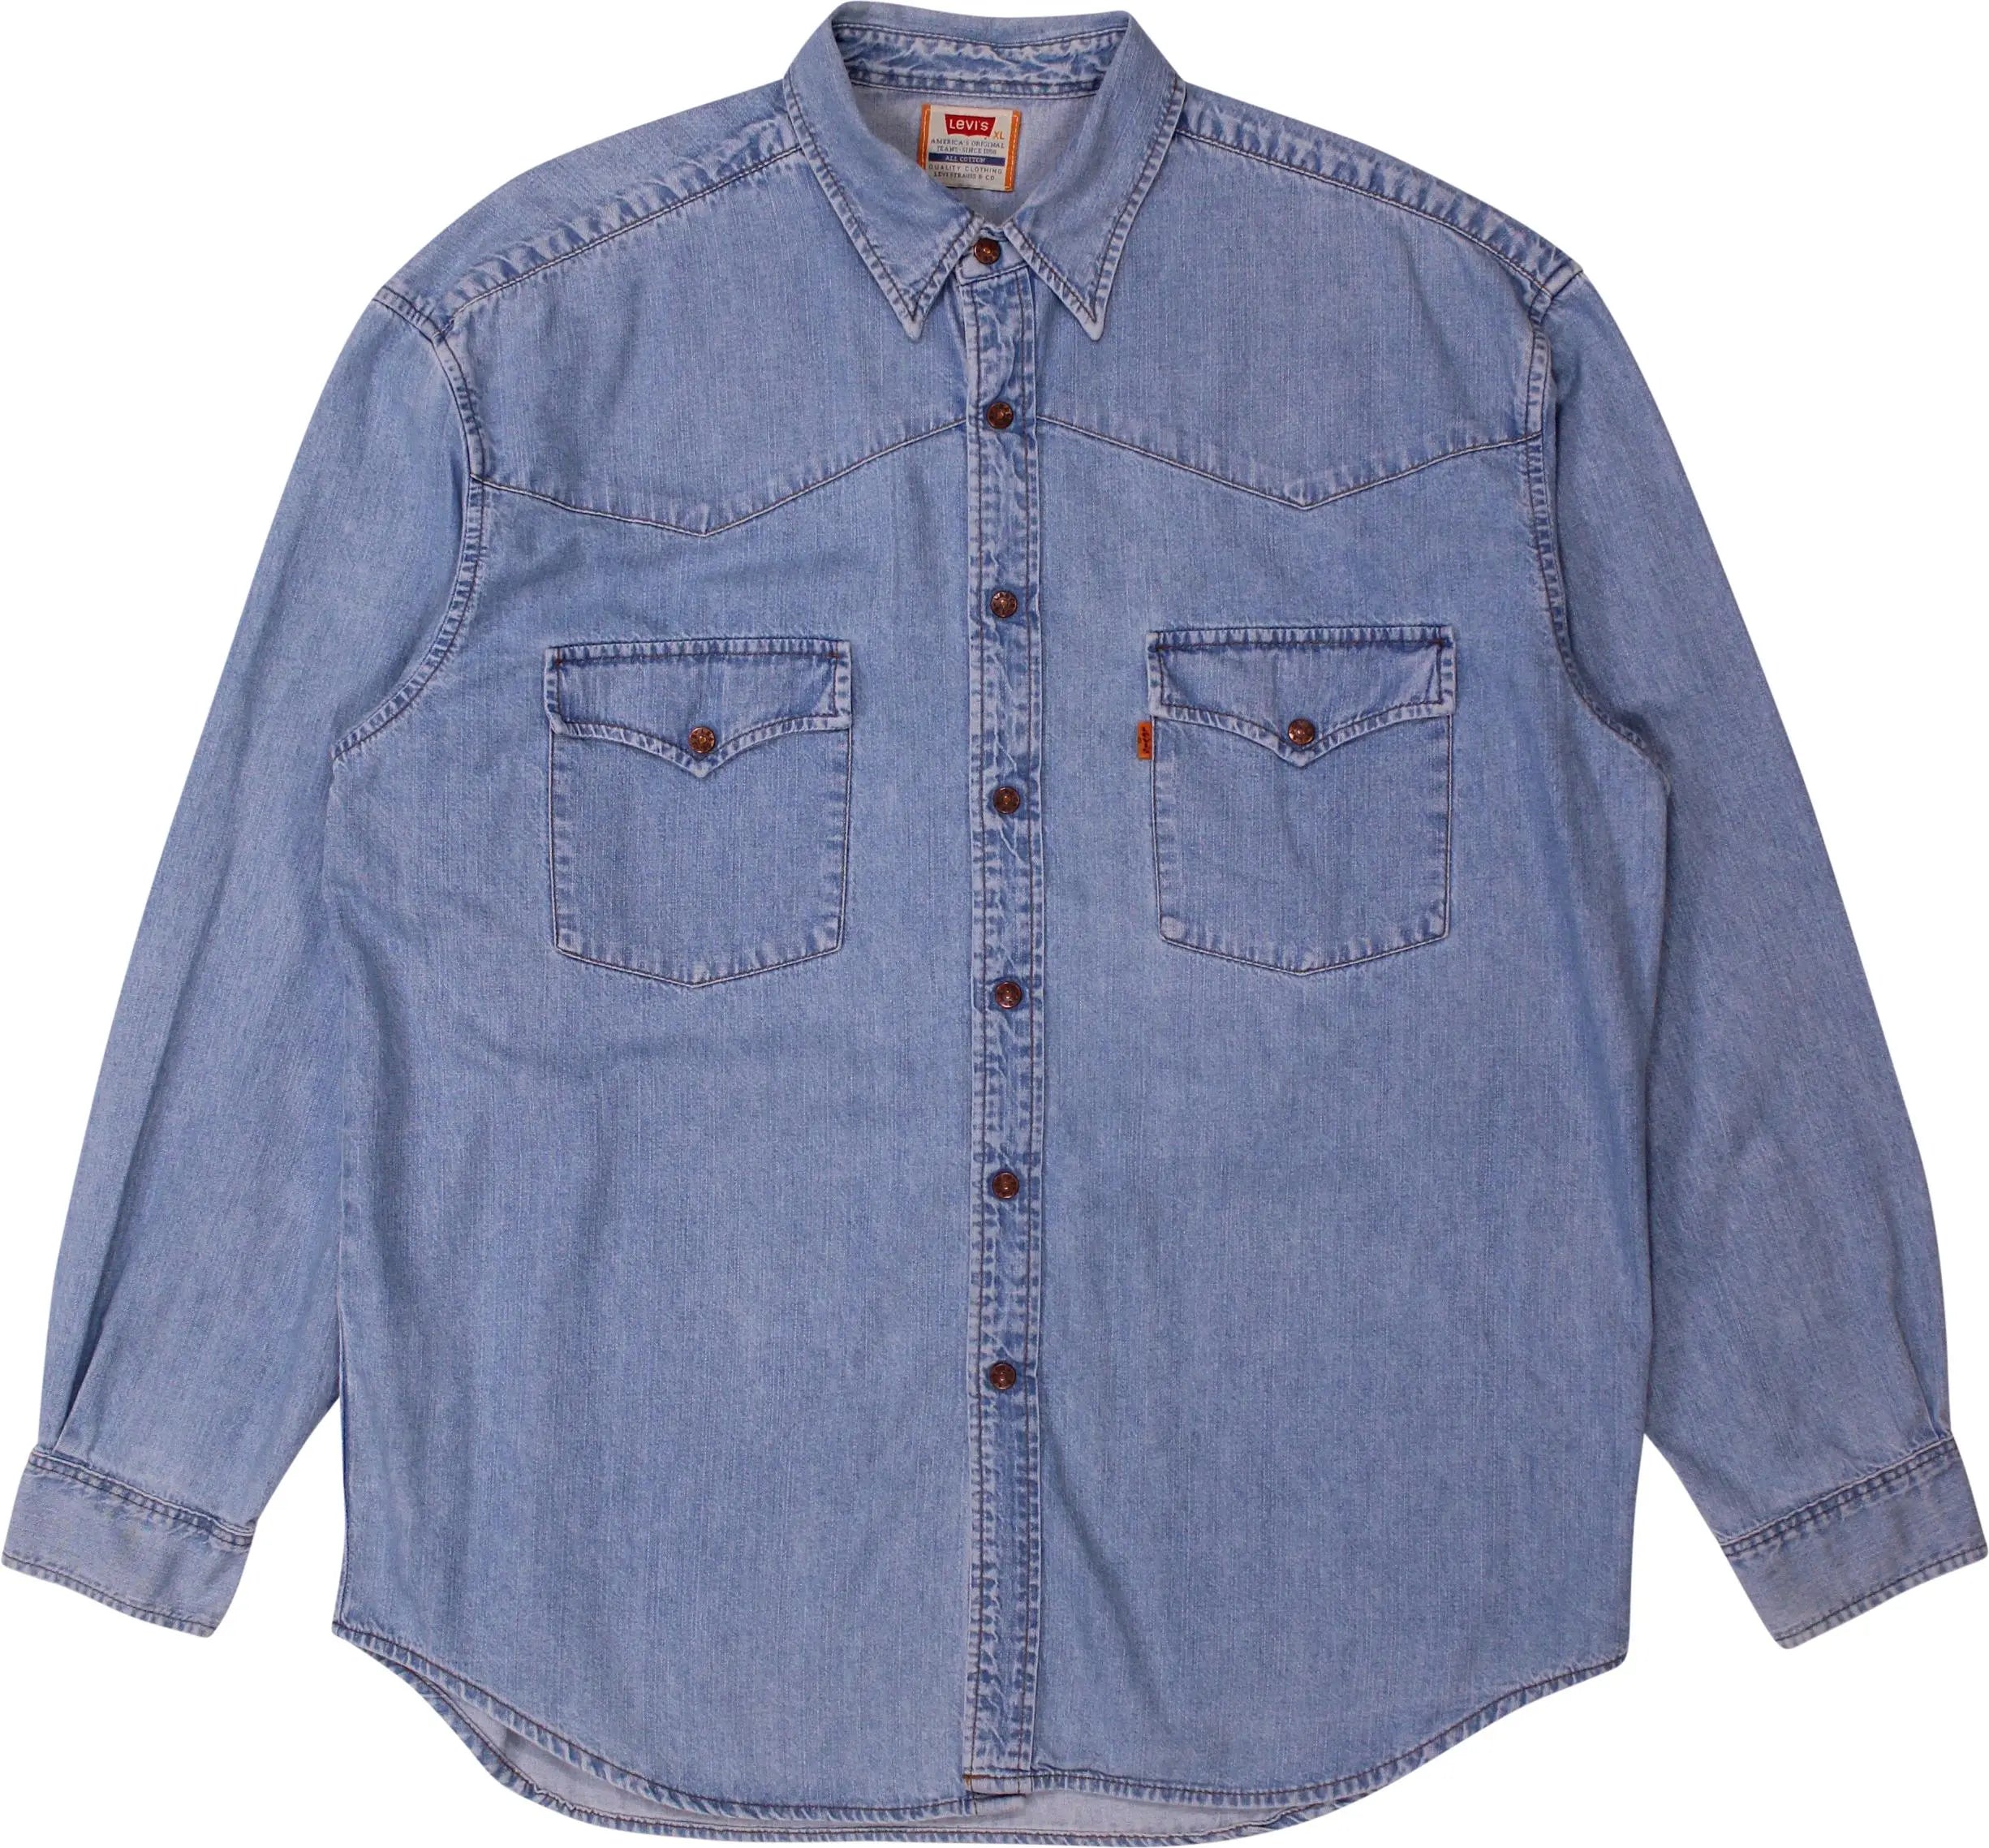 Levi's - Blue Denim Shirt by Levi's- ThriftTale.com - Vintage and second handclothing